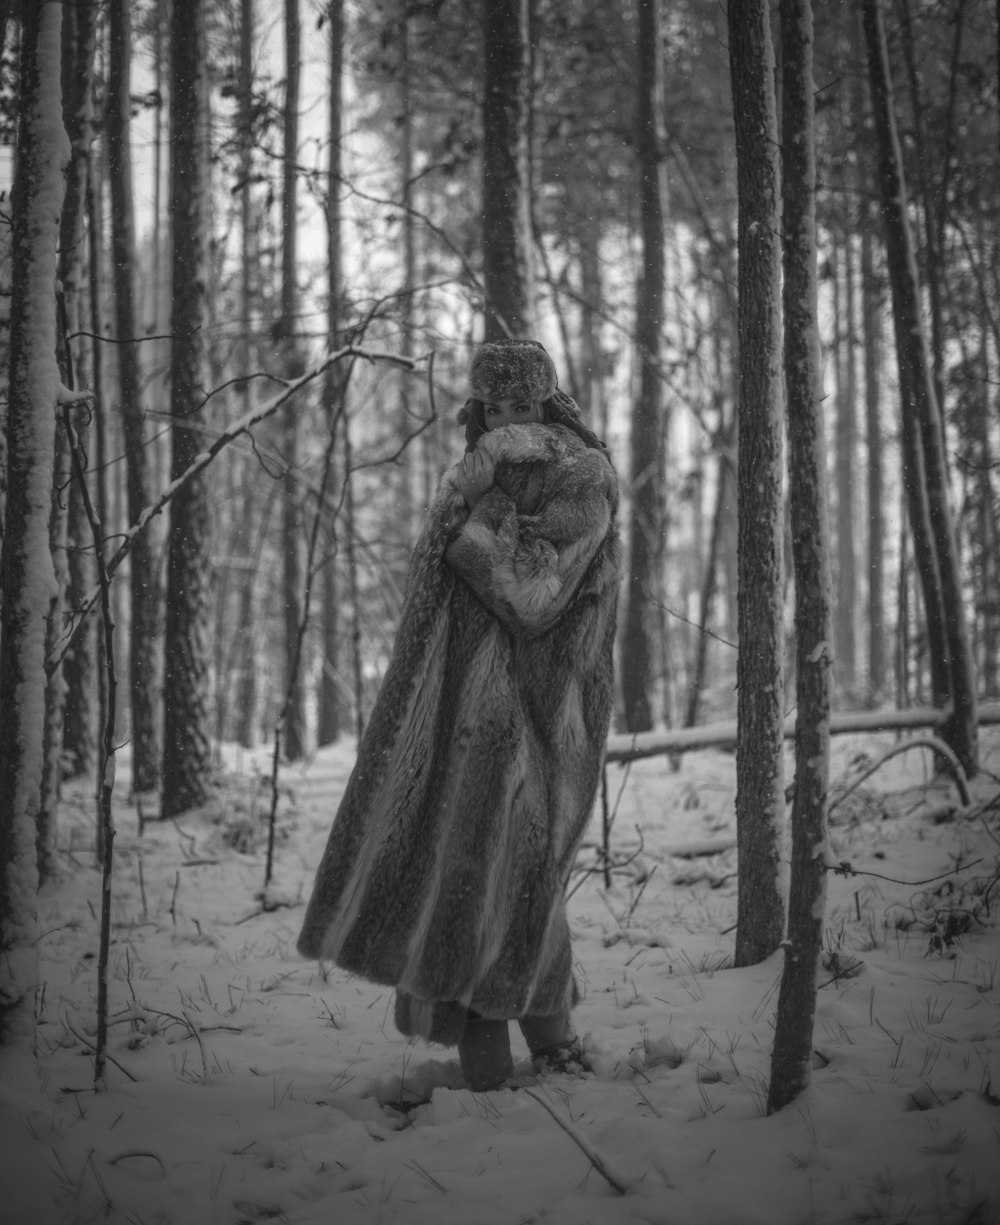 grayscale photo of person in winter coat standing in forest